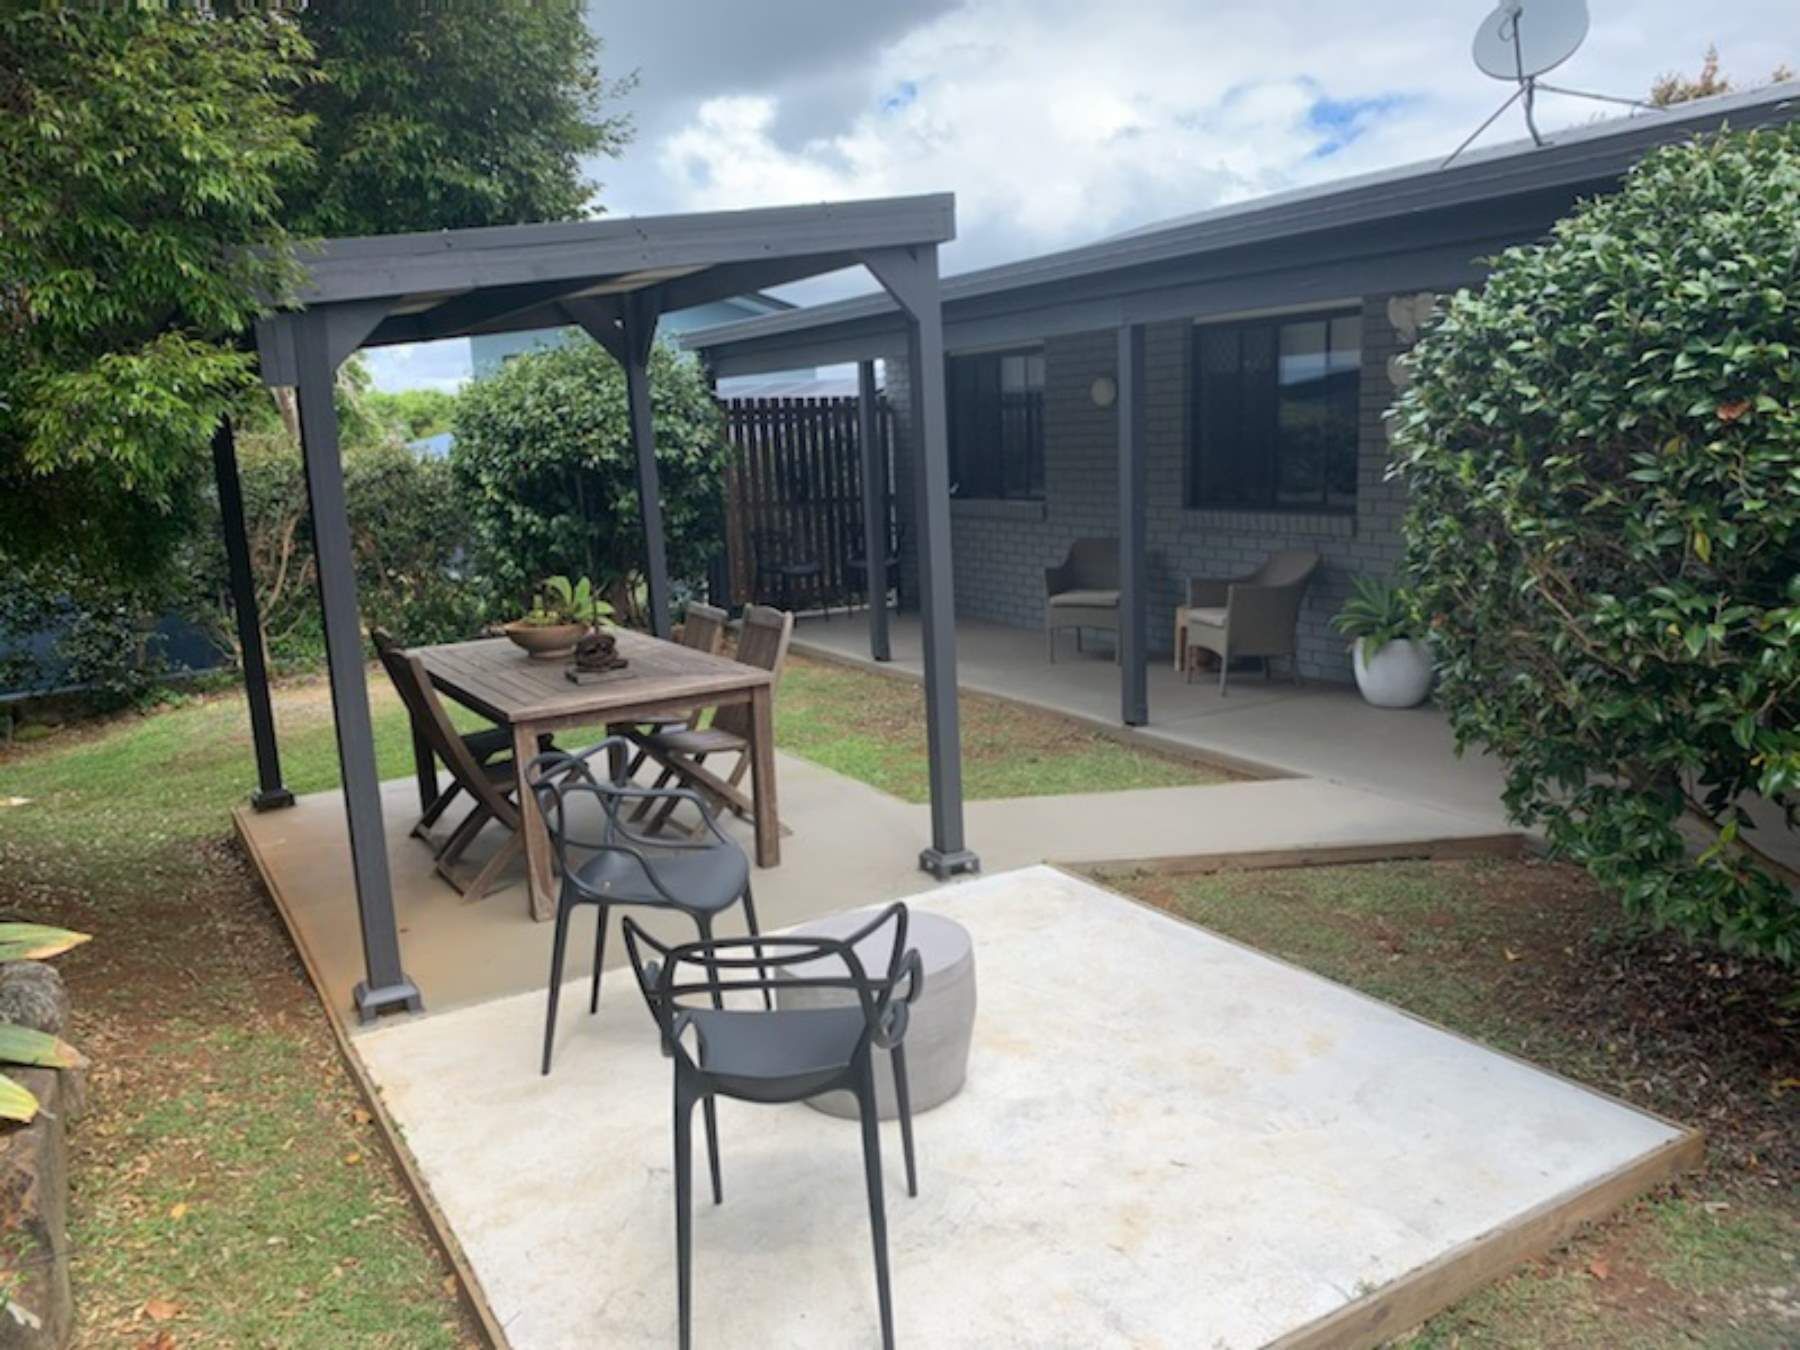 2 Bedroom Cottage in the Heart of Maleny Township